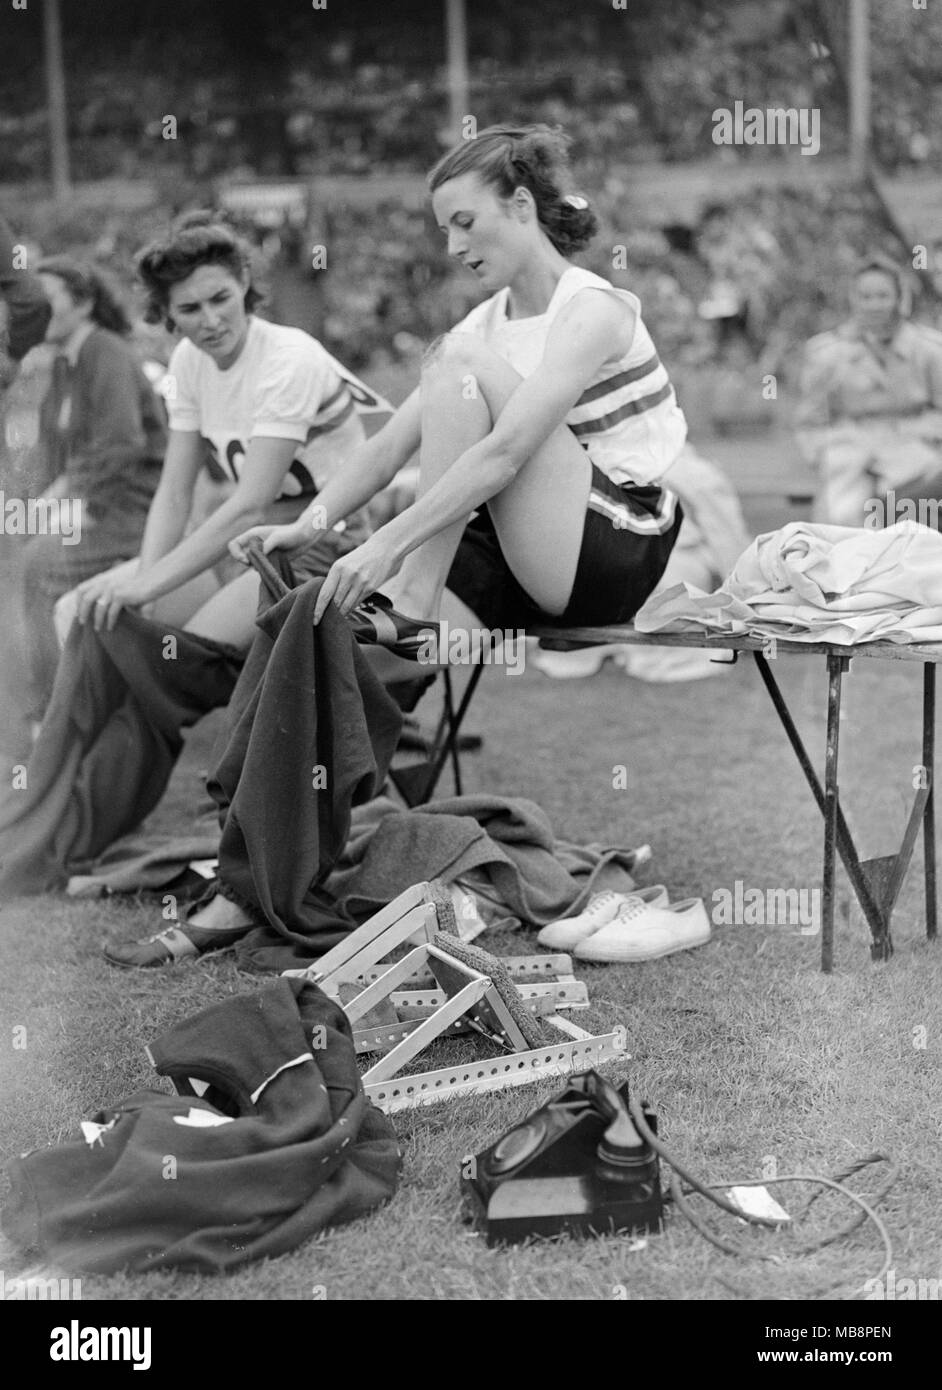 1948 Olympic Games in London. British athlete Maureen Gardner. Maureen Angela Jane Dyson (née Gardner, 12 November 1928 – 2 September 1974) was a British athlete who competed mainly in the 80 metres hurdles. She won silver medals at the 1948 Summer Olympics and 1950 European Athletics Championships, both times losing to Fanny Blankers-Koen. She was coached by Geoff Dyson, whom she married one month after the 1948 Olympics. She died from cancer, aged 45, on 2nd September 1974. Stock Photo